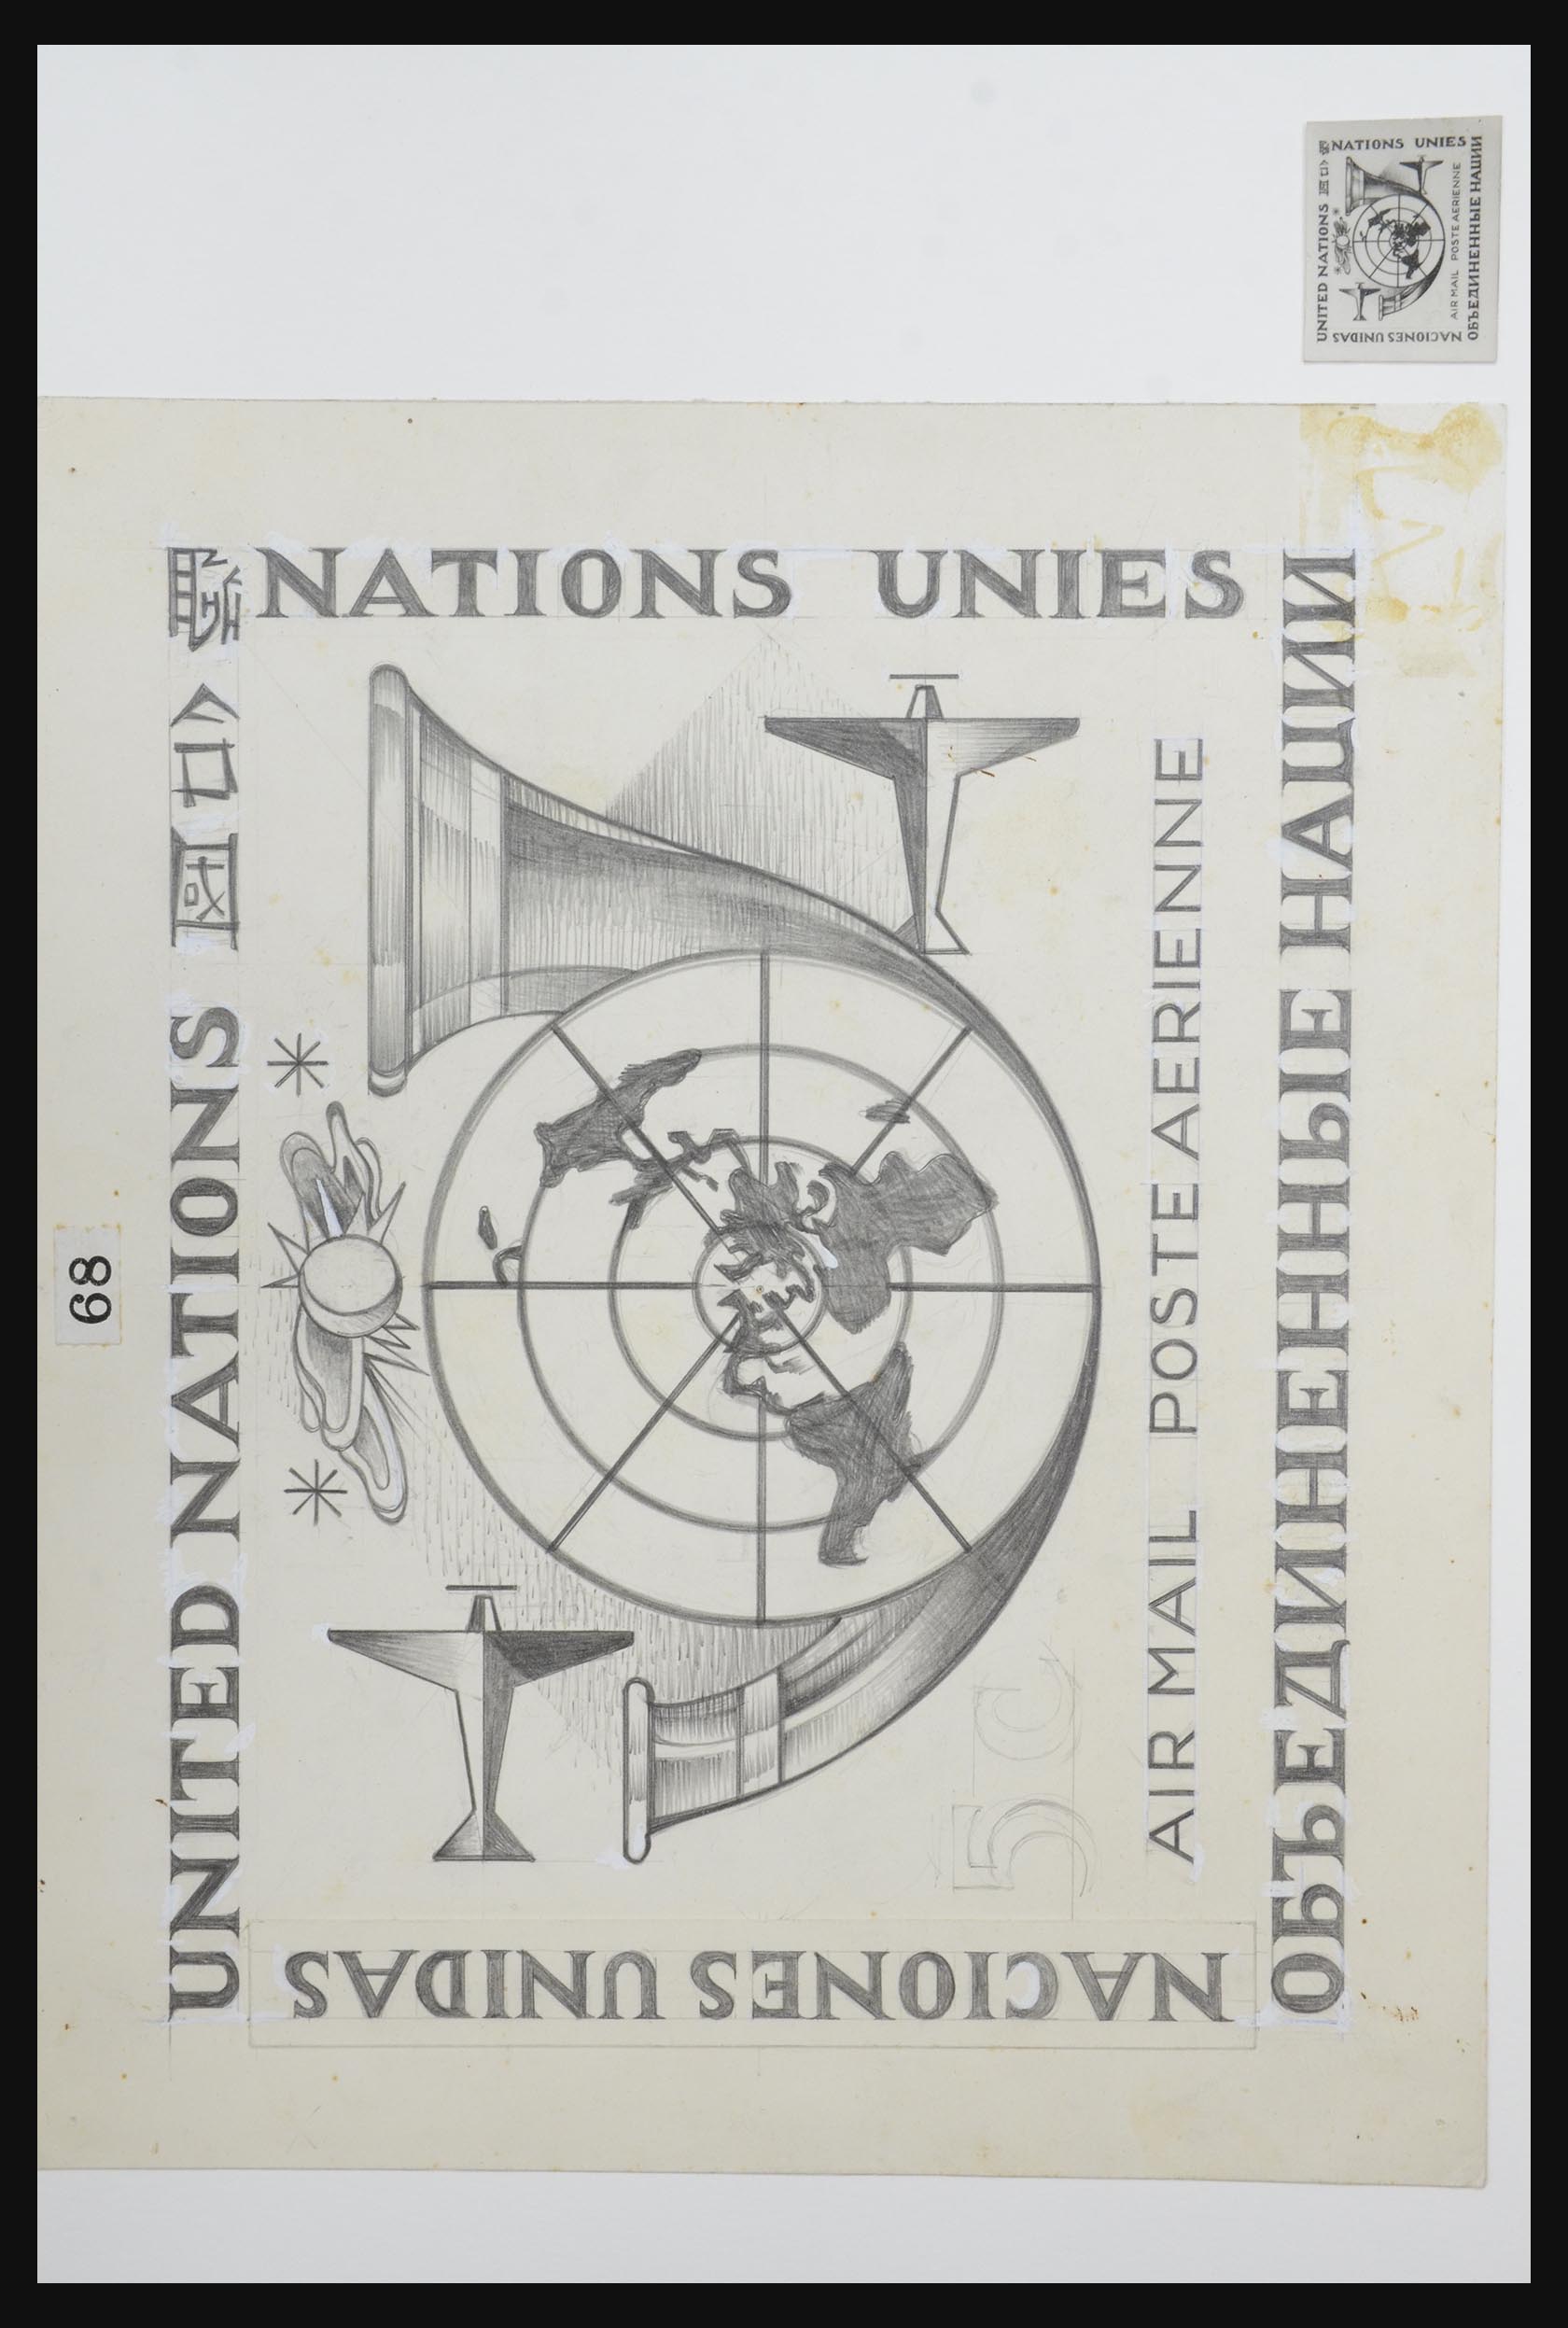 32348 005 - 32348 United Nations New York designs.